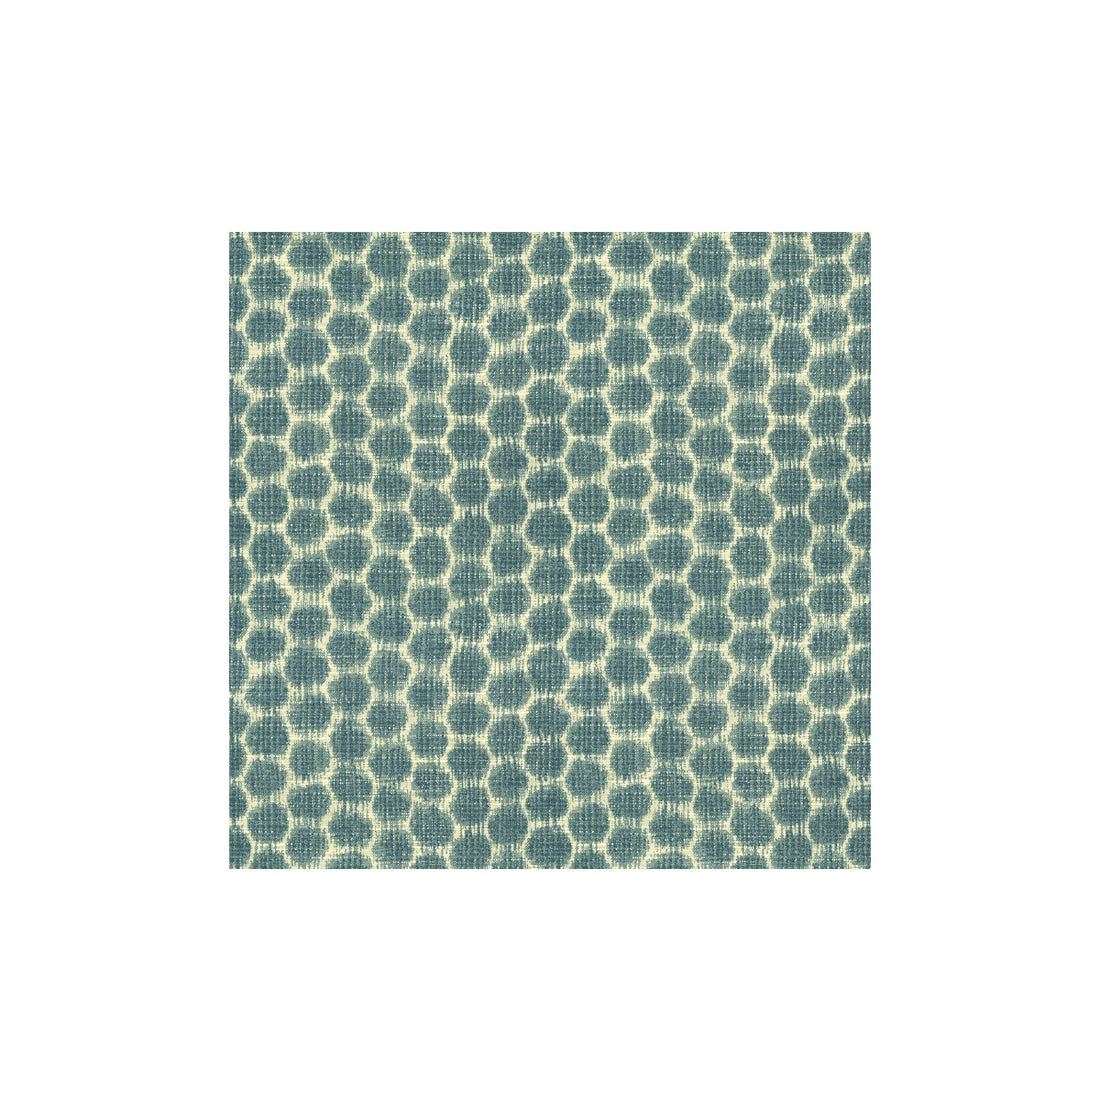 Kravet Smart fabric in 33134-5 color - pattern 33134.5.0 - by Kravet Smart in the Echo collection